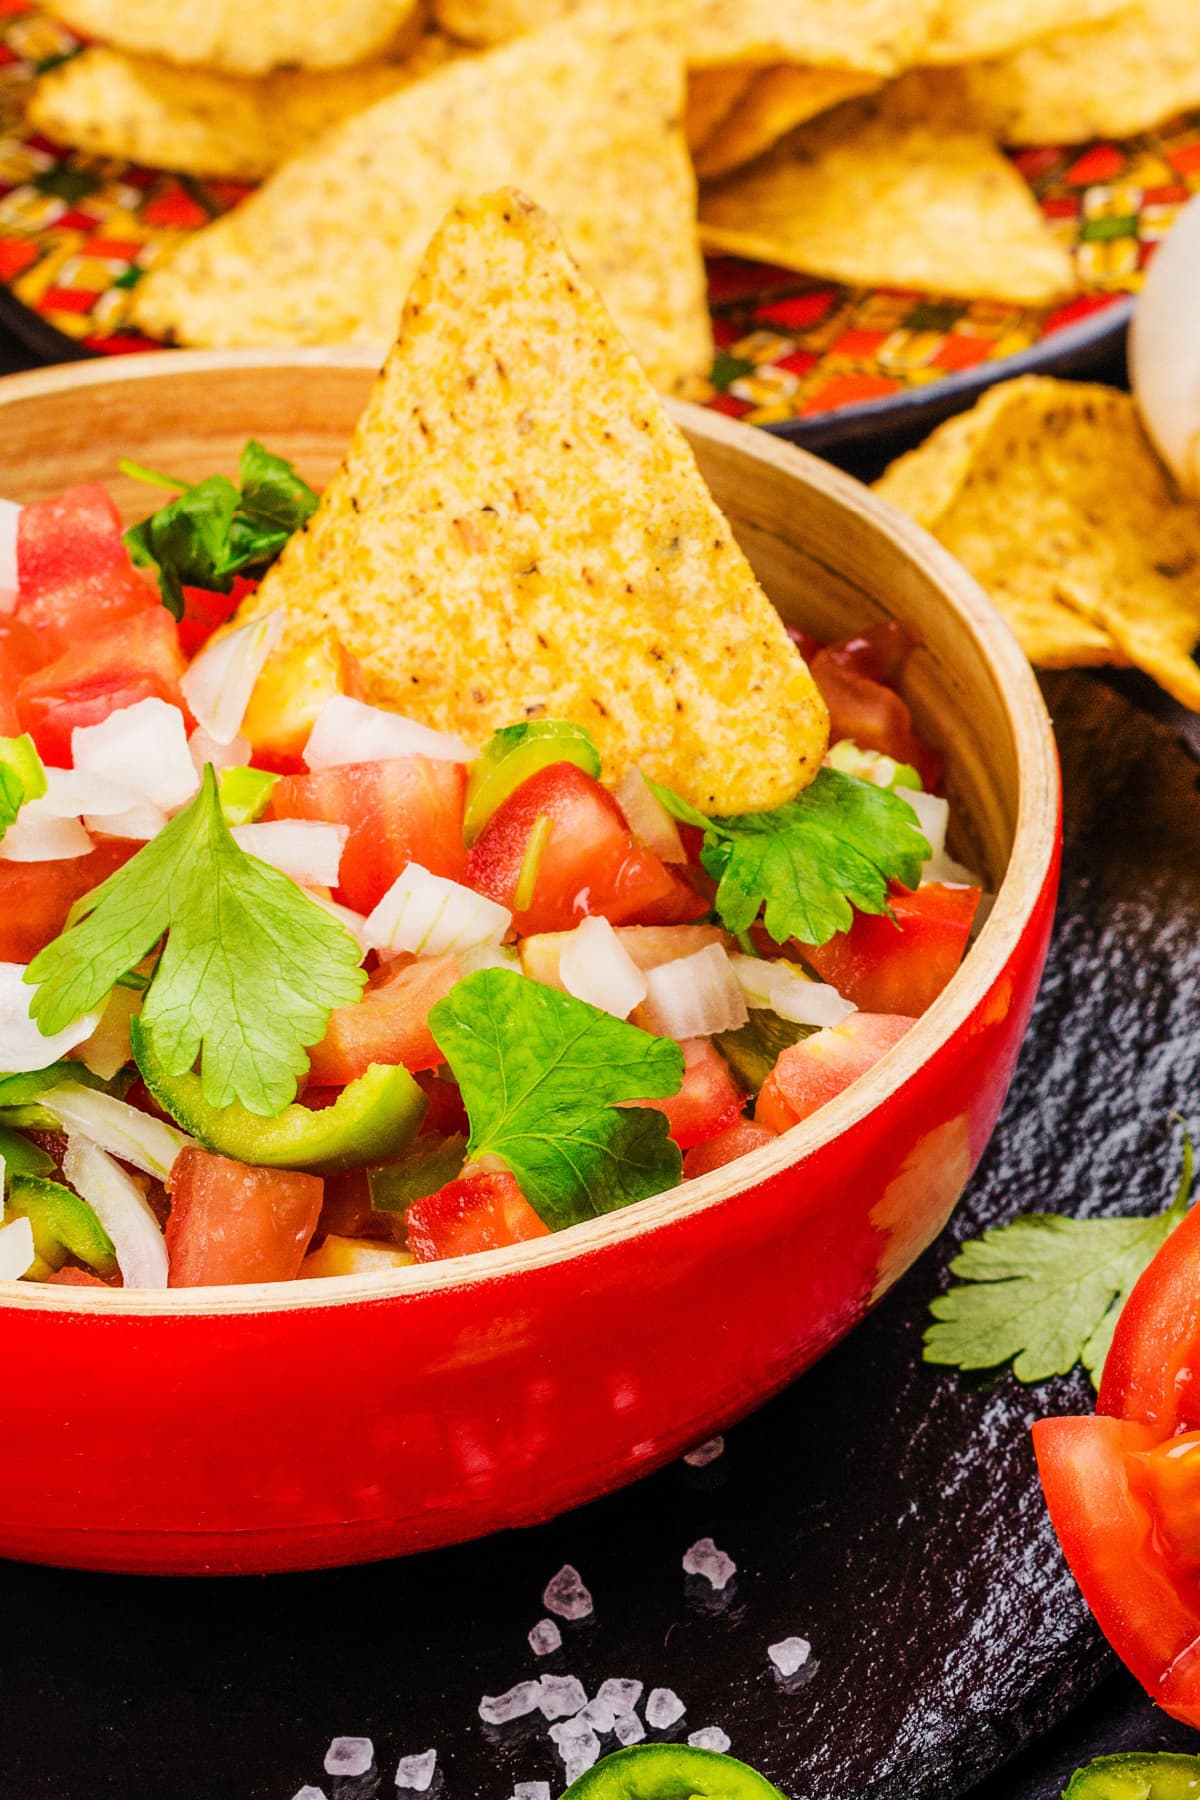 Pico de gallo with chopped tomatoes, onions, cilantro, and jalapenos served on a red bowl with nachos.